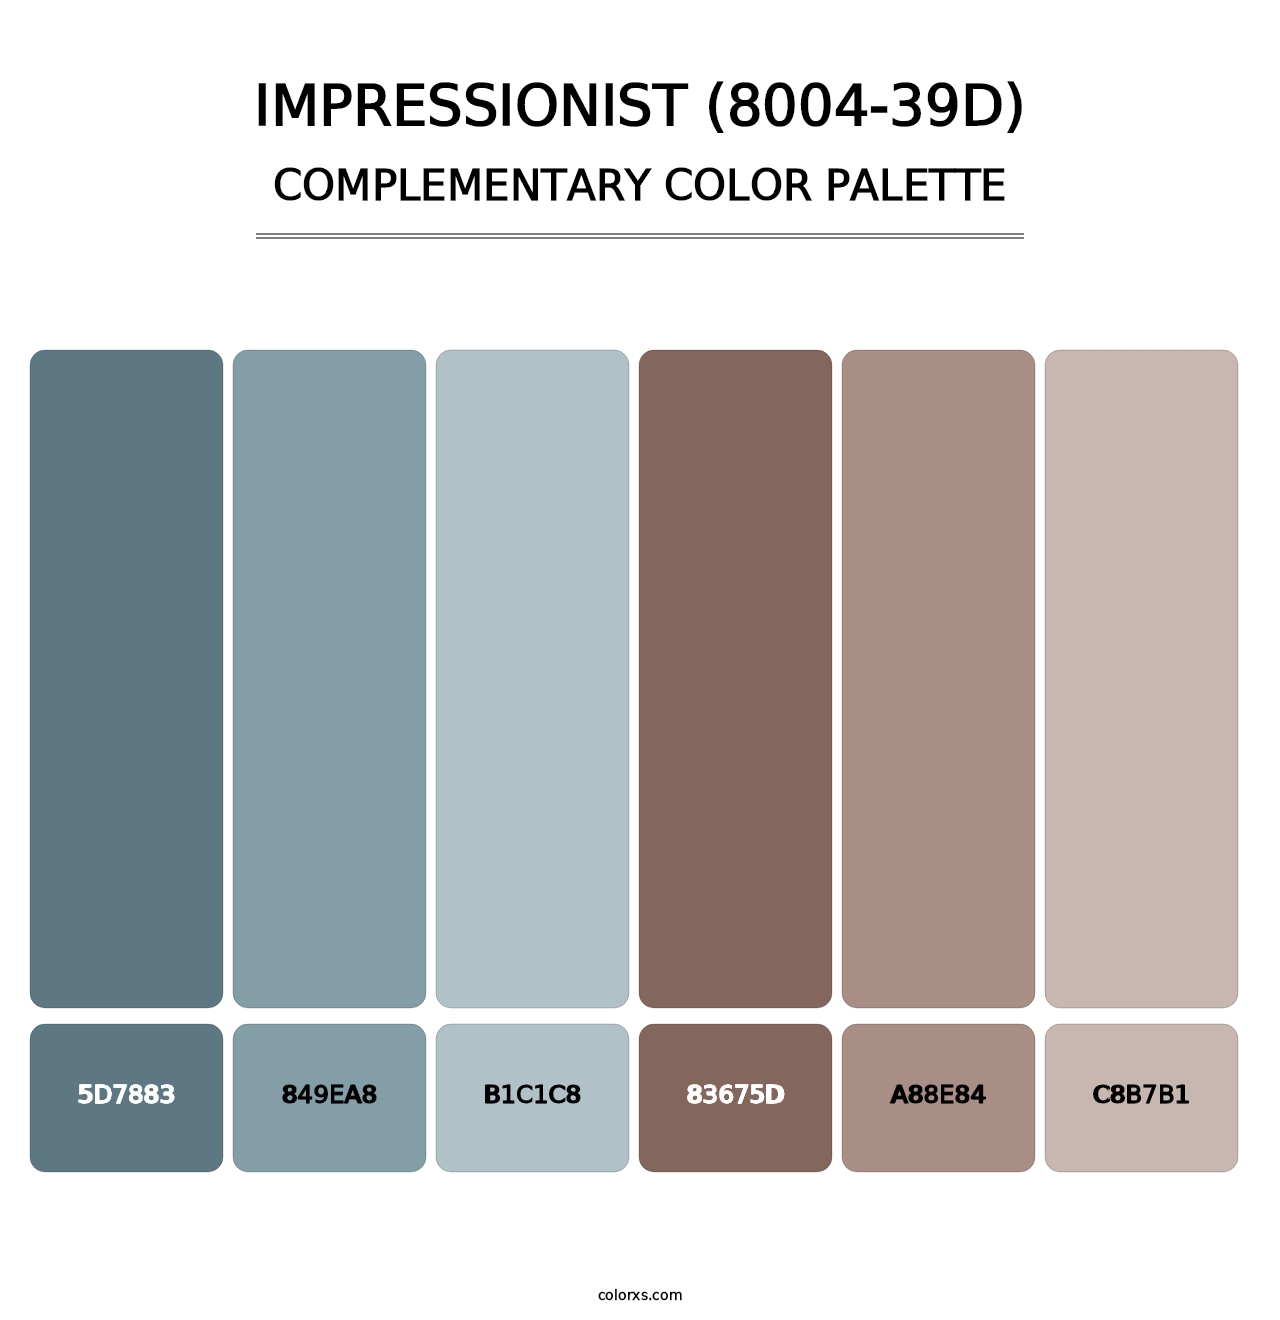 Impressionist (8004-39D) - Complementary Color Palette